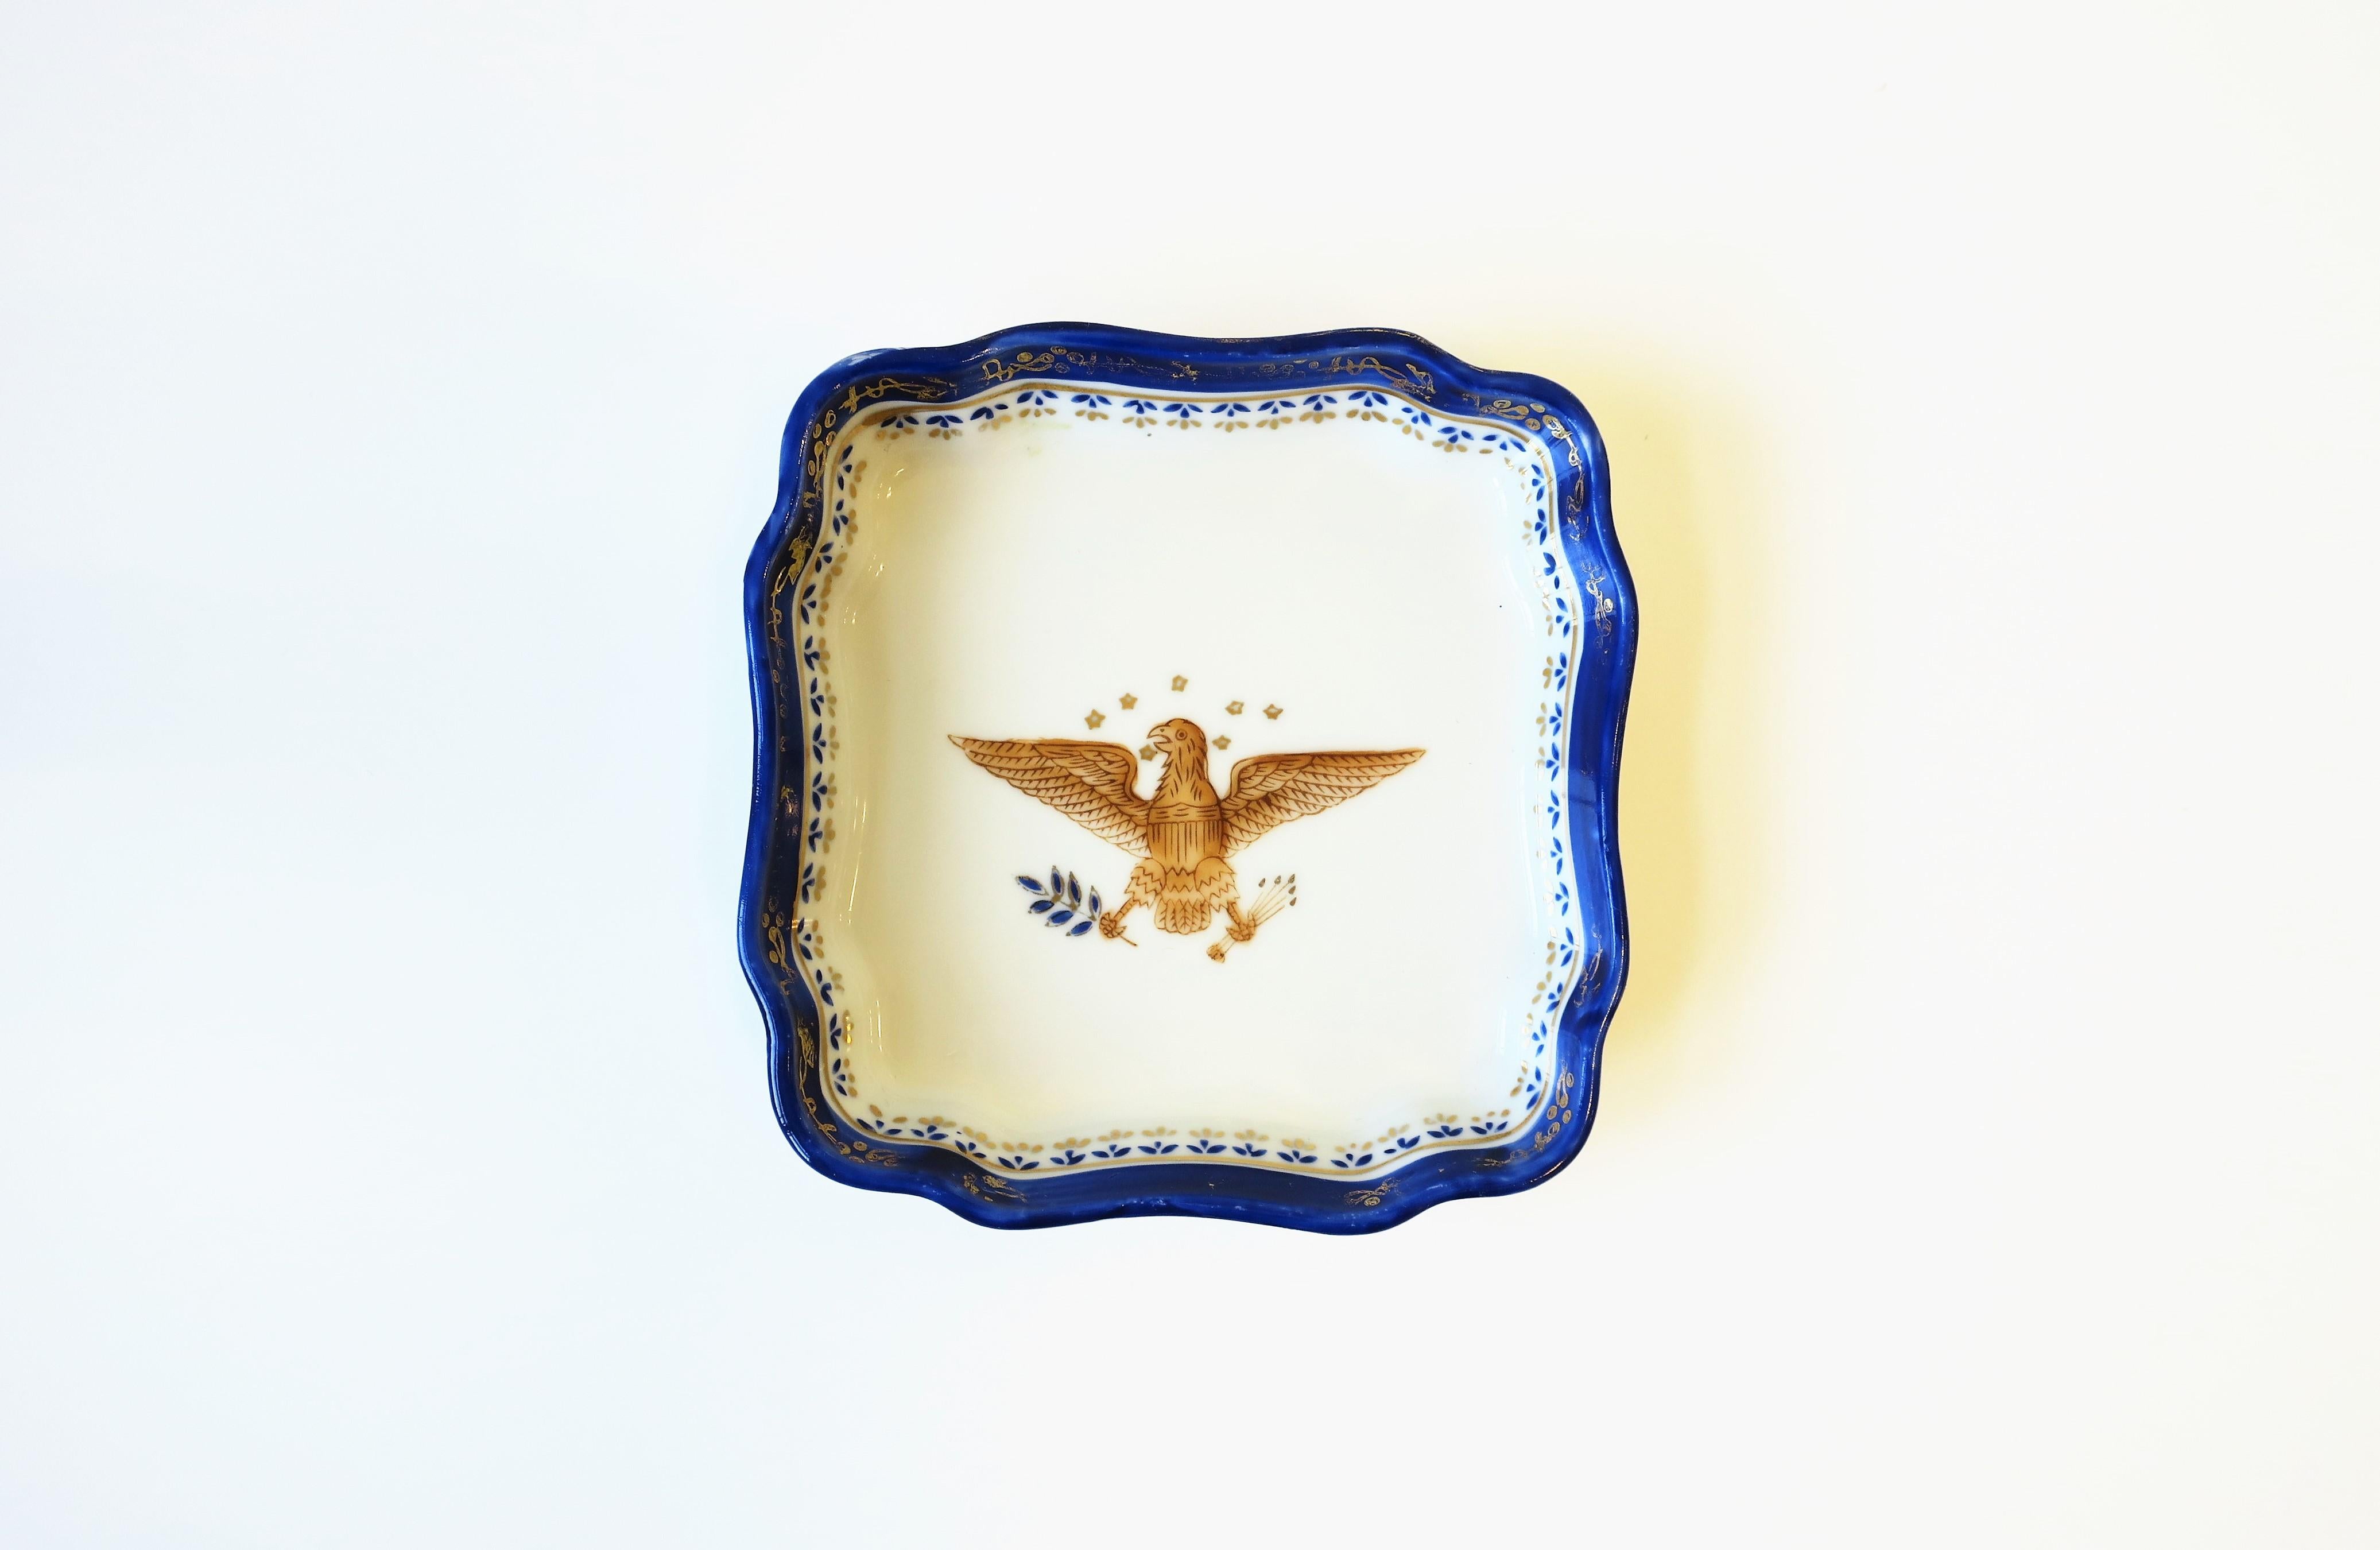 A white porcelain jewelry or trinket dish with blue and gold bird design in the Federal style, circa early to mid-20th century, Europe. A beautiful gold Eagle bird with a halo of stars holding wheat. Great as a standalone piece or to hold jewelry or